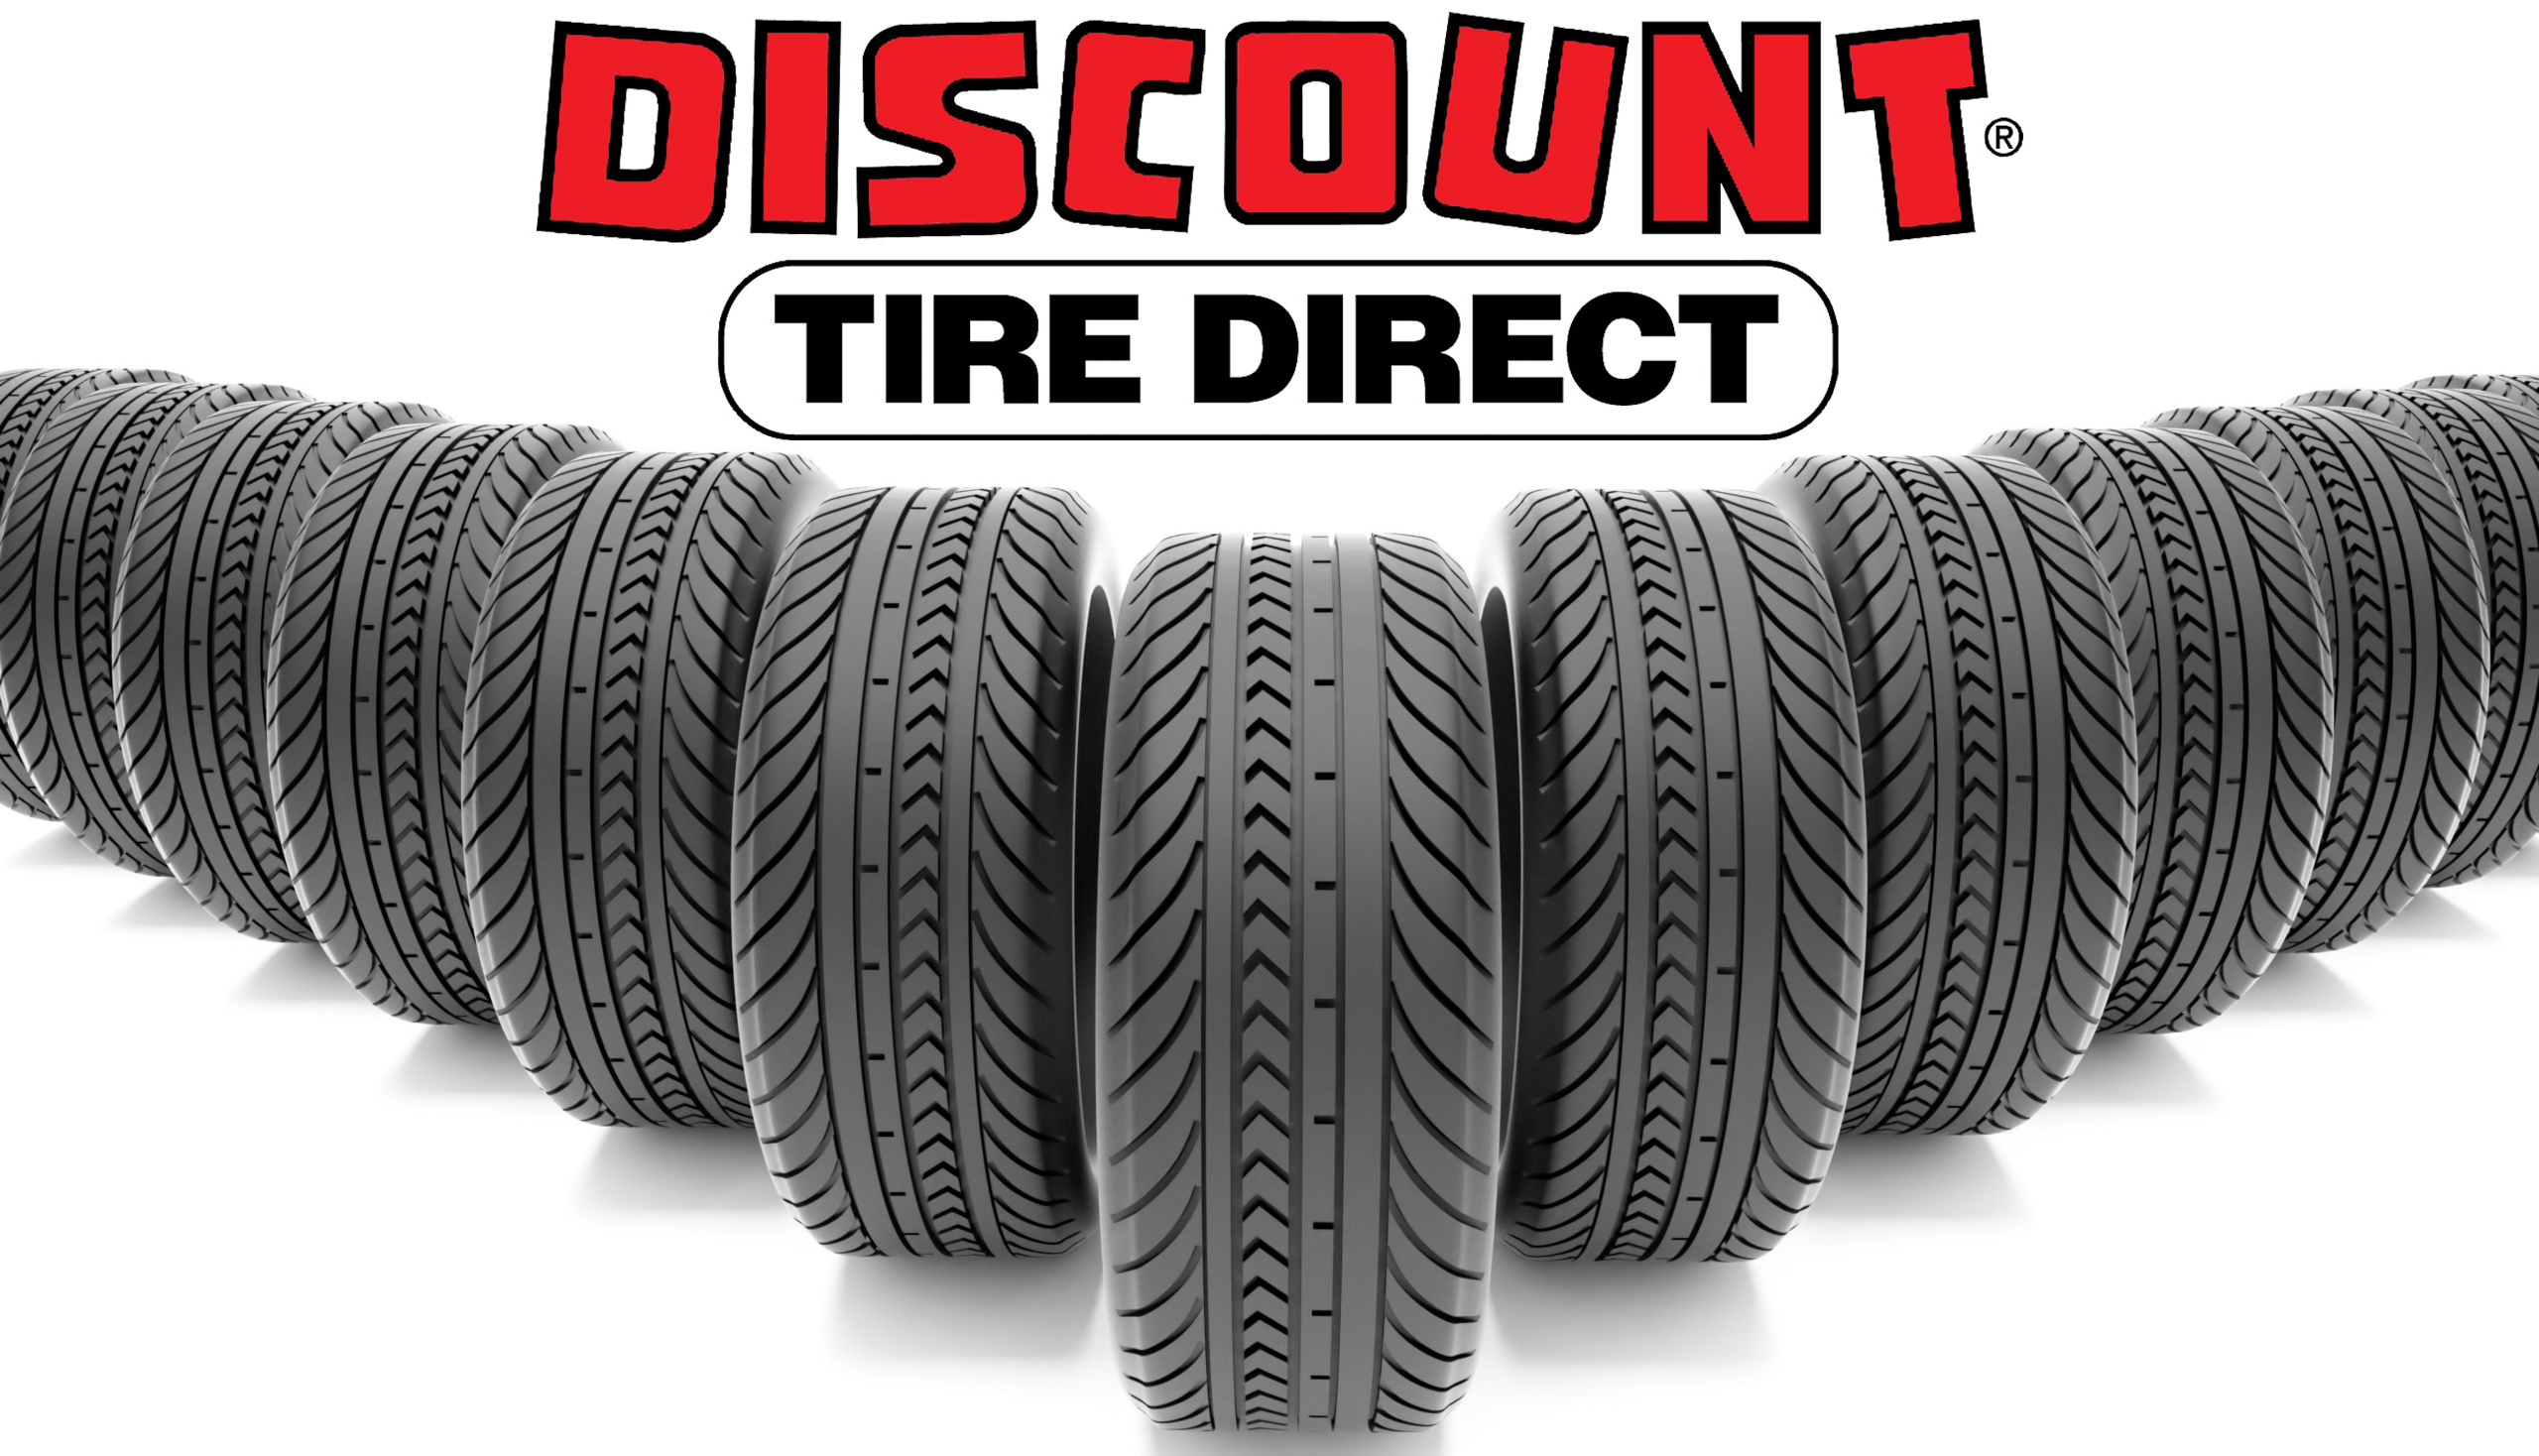 discount-tire-direct-memorial-day-sale-w-up-to-320-in-rebates-free